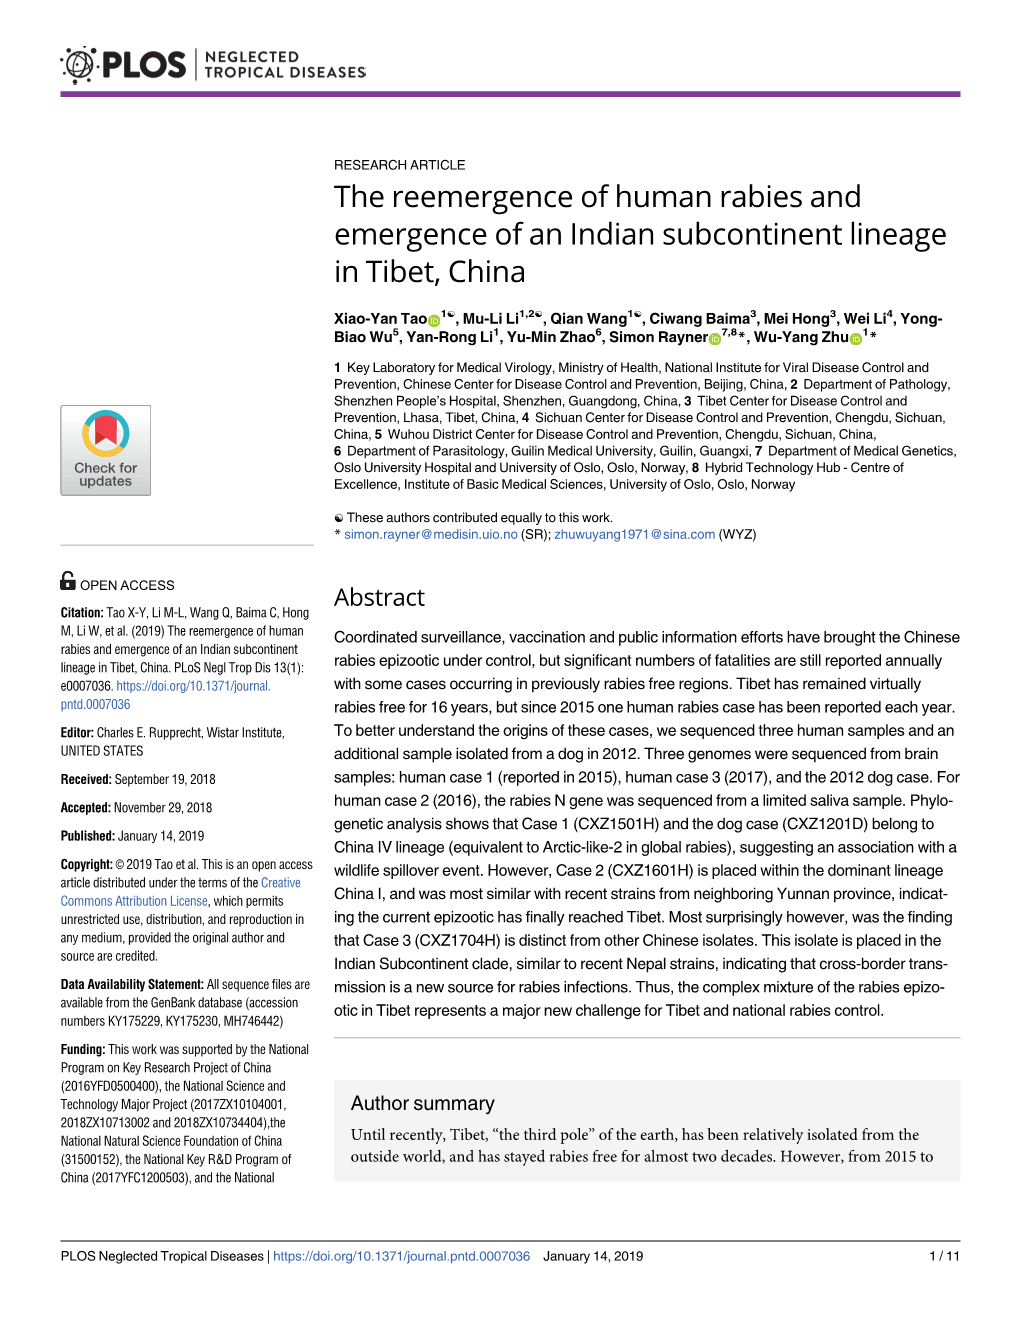 The Reemergence of Human Rabies and Emergence of an Indian Subcontinent Lineage in Tibet, China